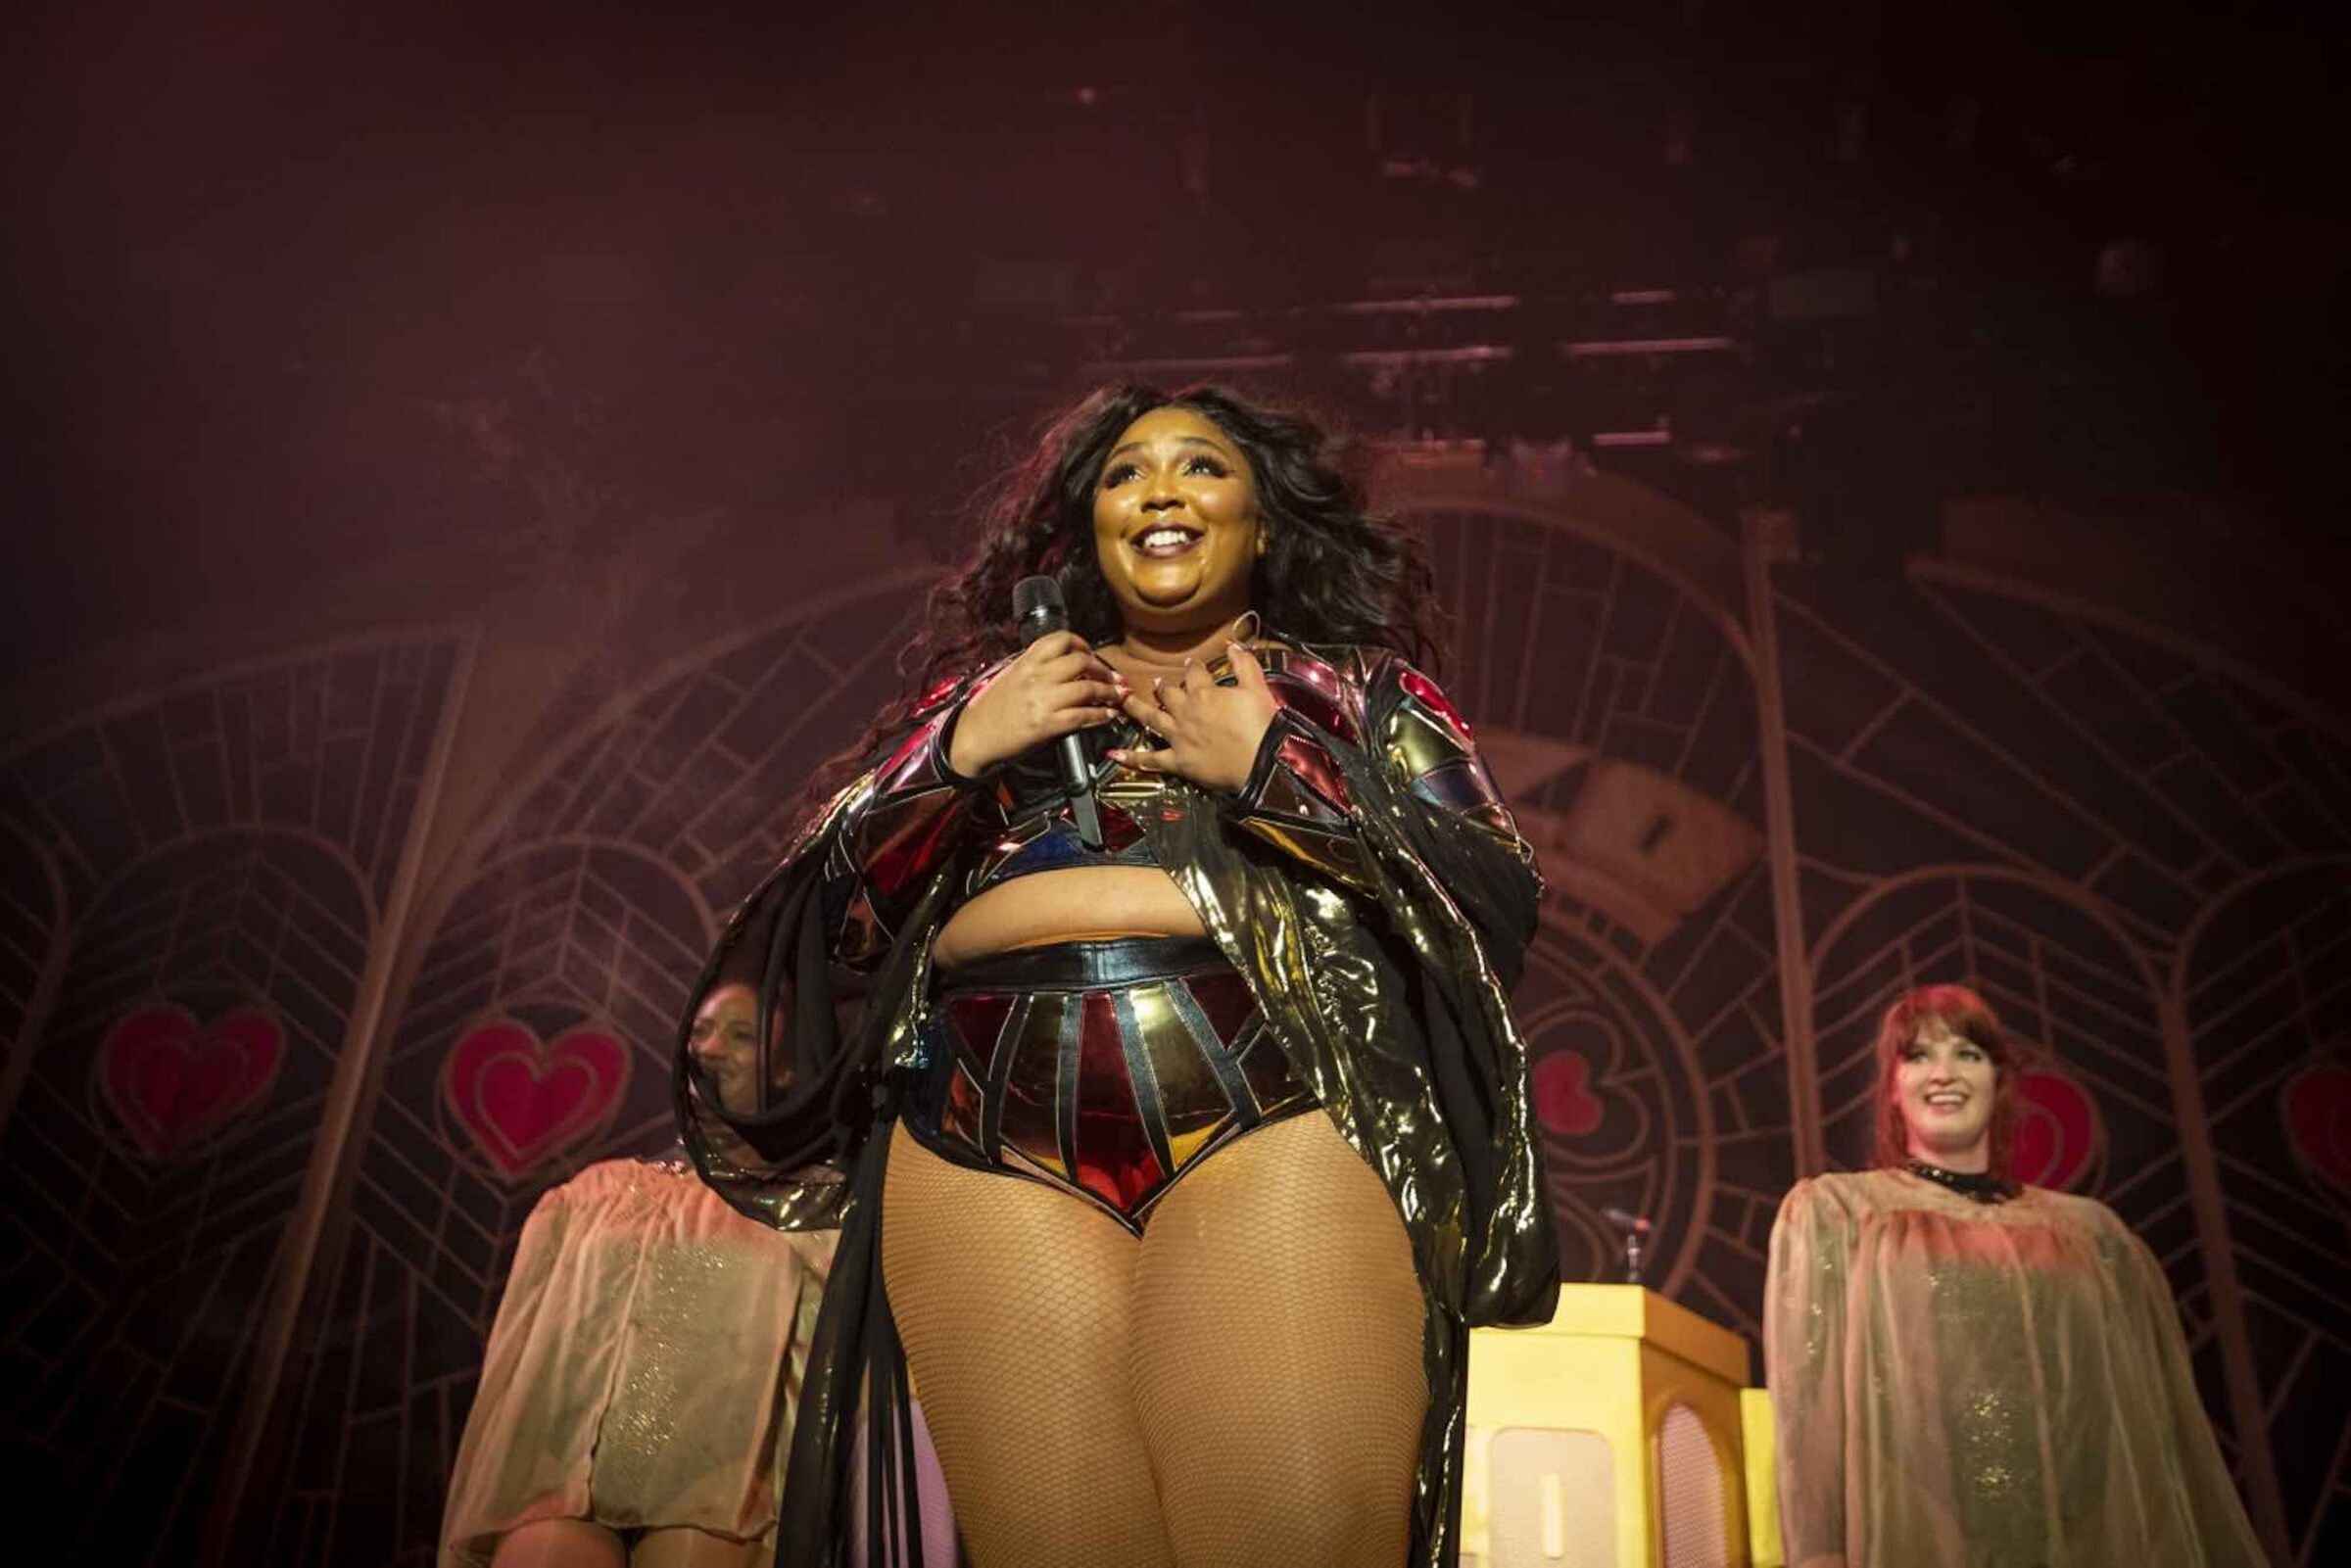 Did Lizzo's nude invitation to dancers fan the flames of controversy or light up the path to self-love? Unwrap the bare truth behind this audacious body positivity movement.